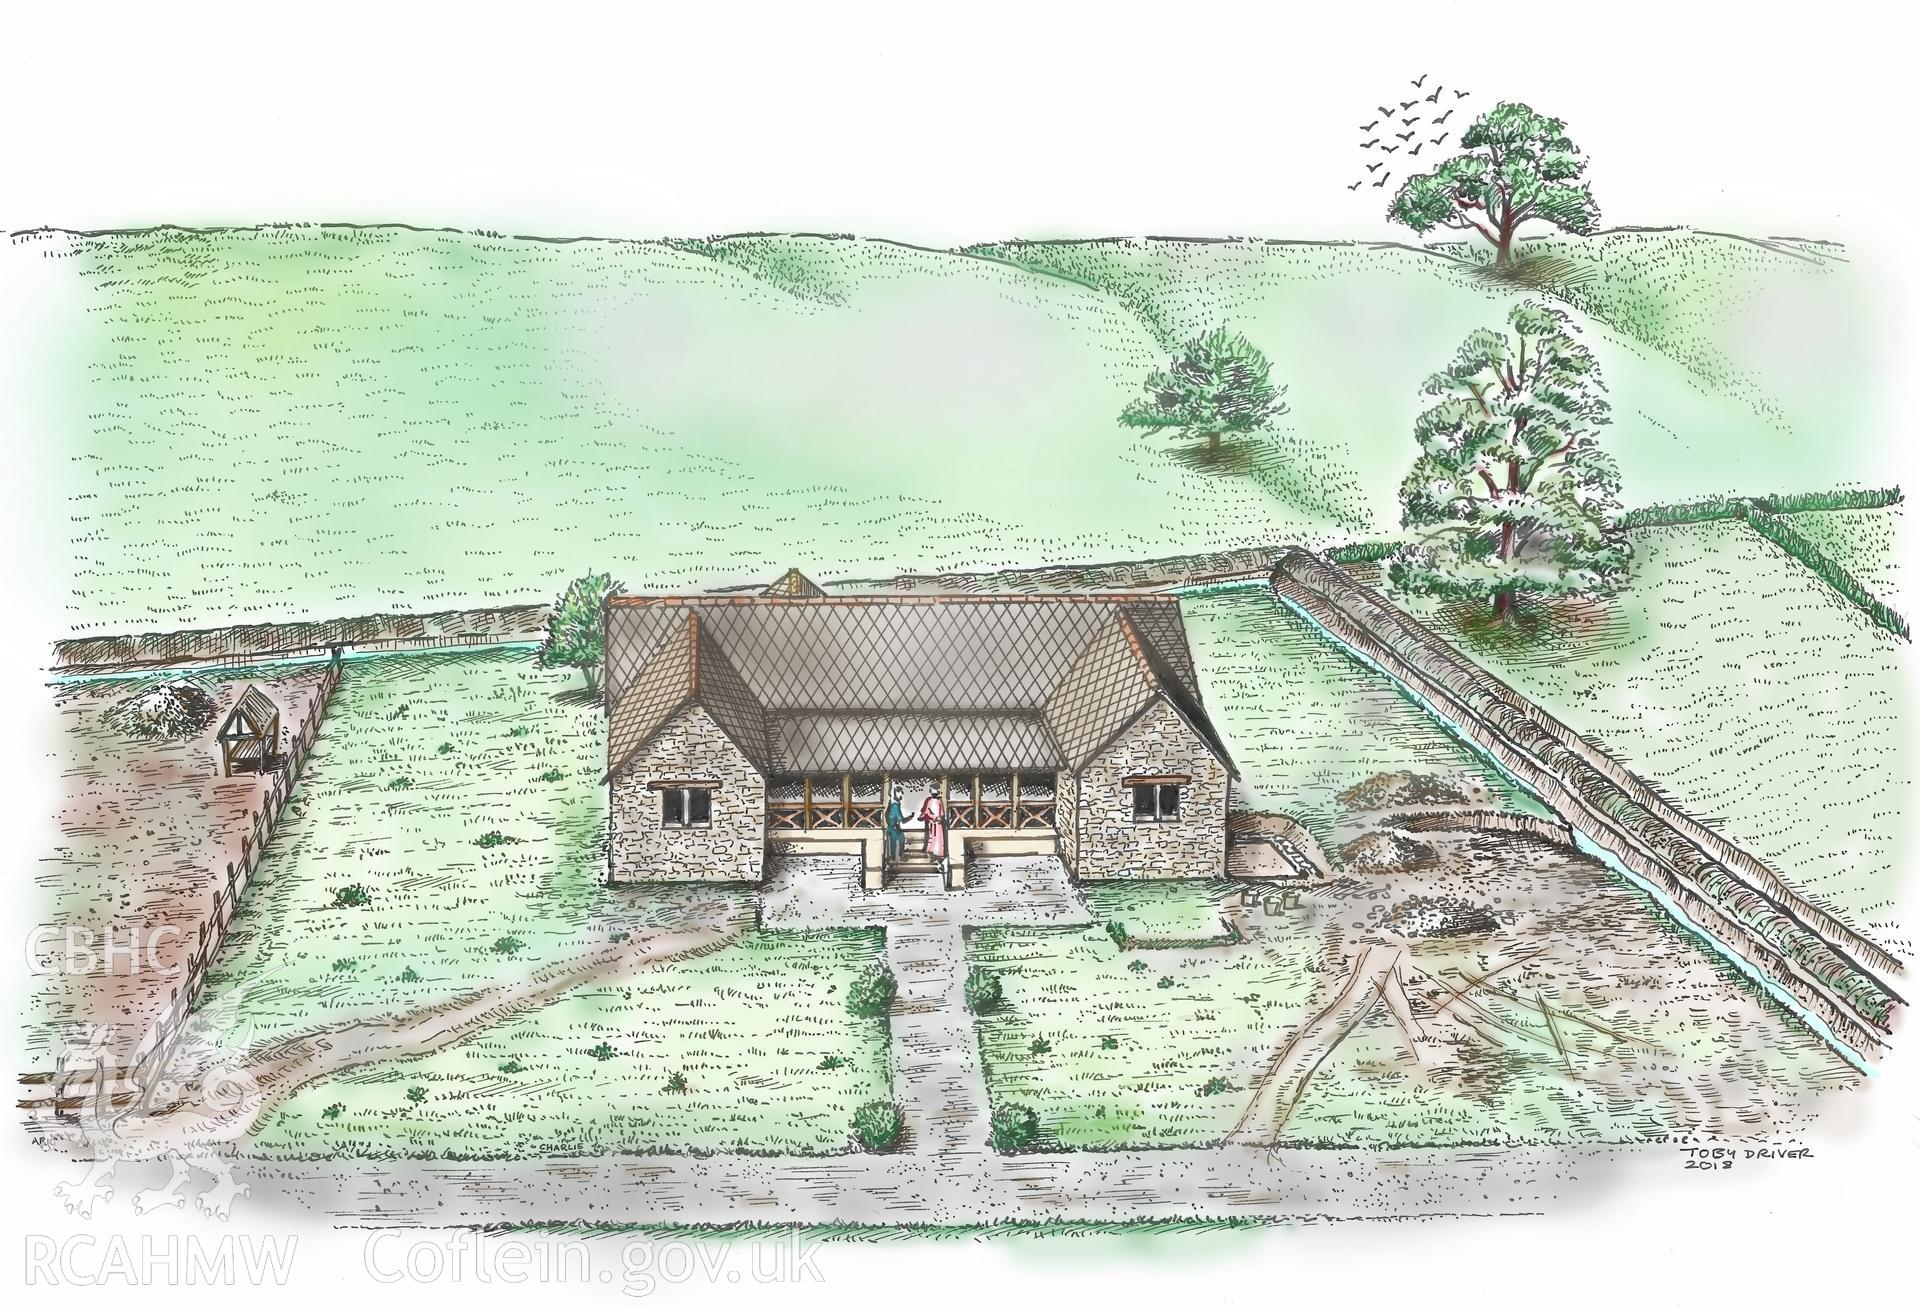 Arch Camb 167 (2018) 143-219. "The Romano-British villa at Abermagwr, Ceredigion: excavations 2010-2015" by Davies and Driver. Colour B/W version of Fig 23. Reconstruction of the domus of Abermagwr Roman Villa.